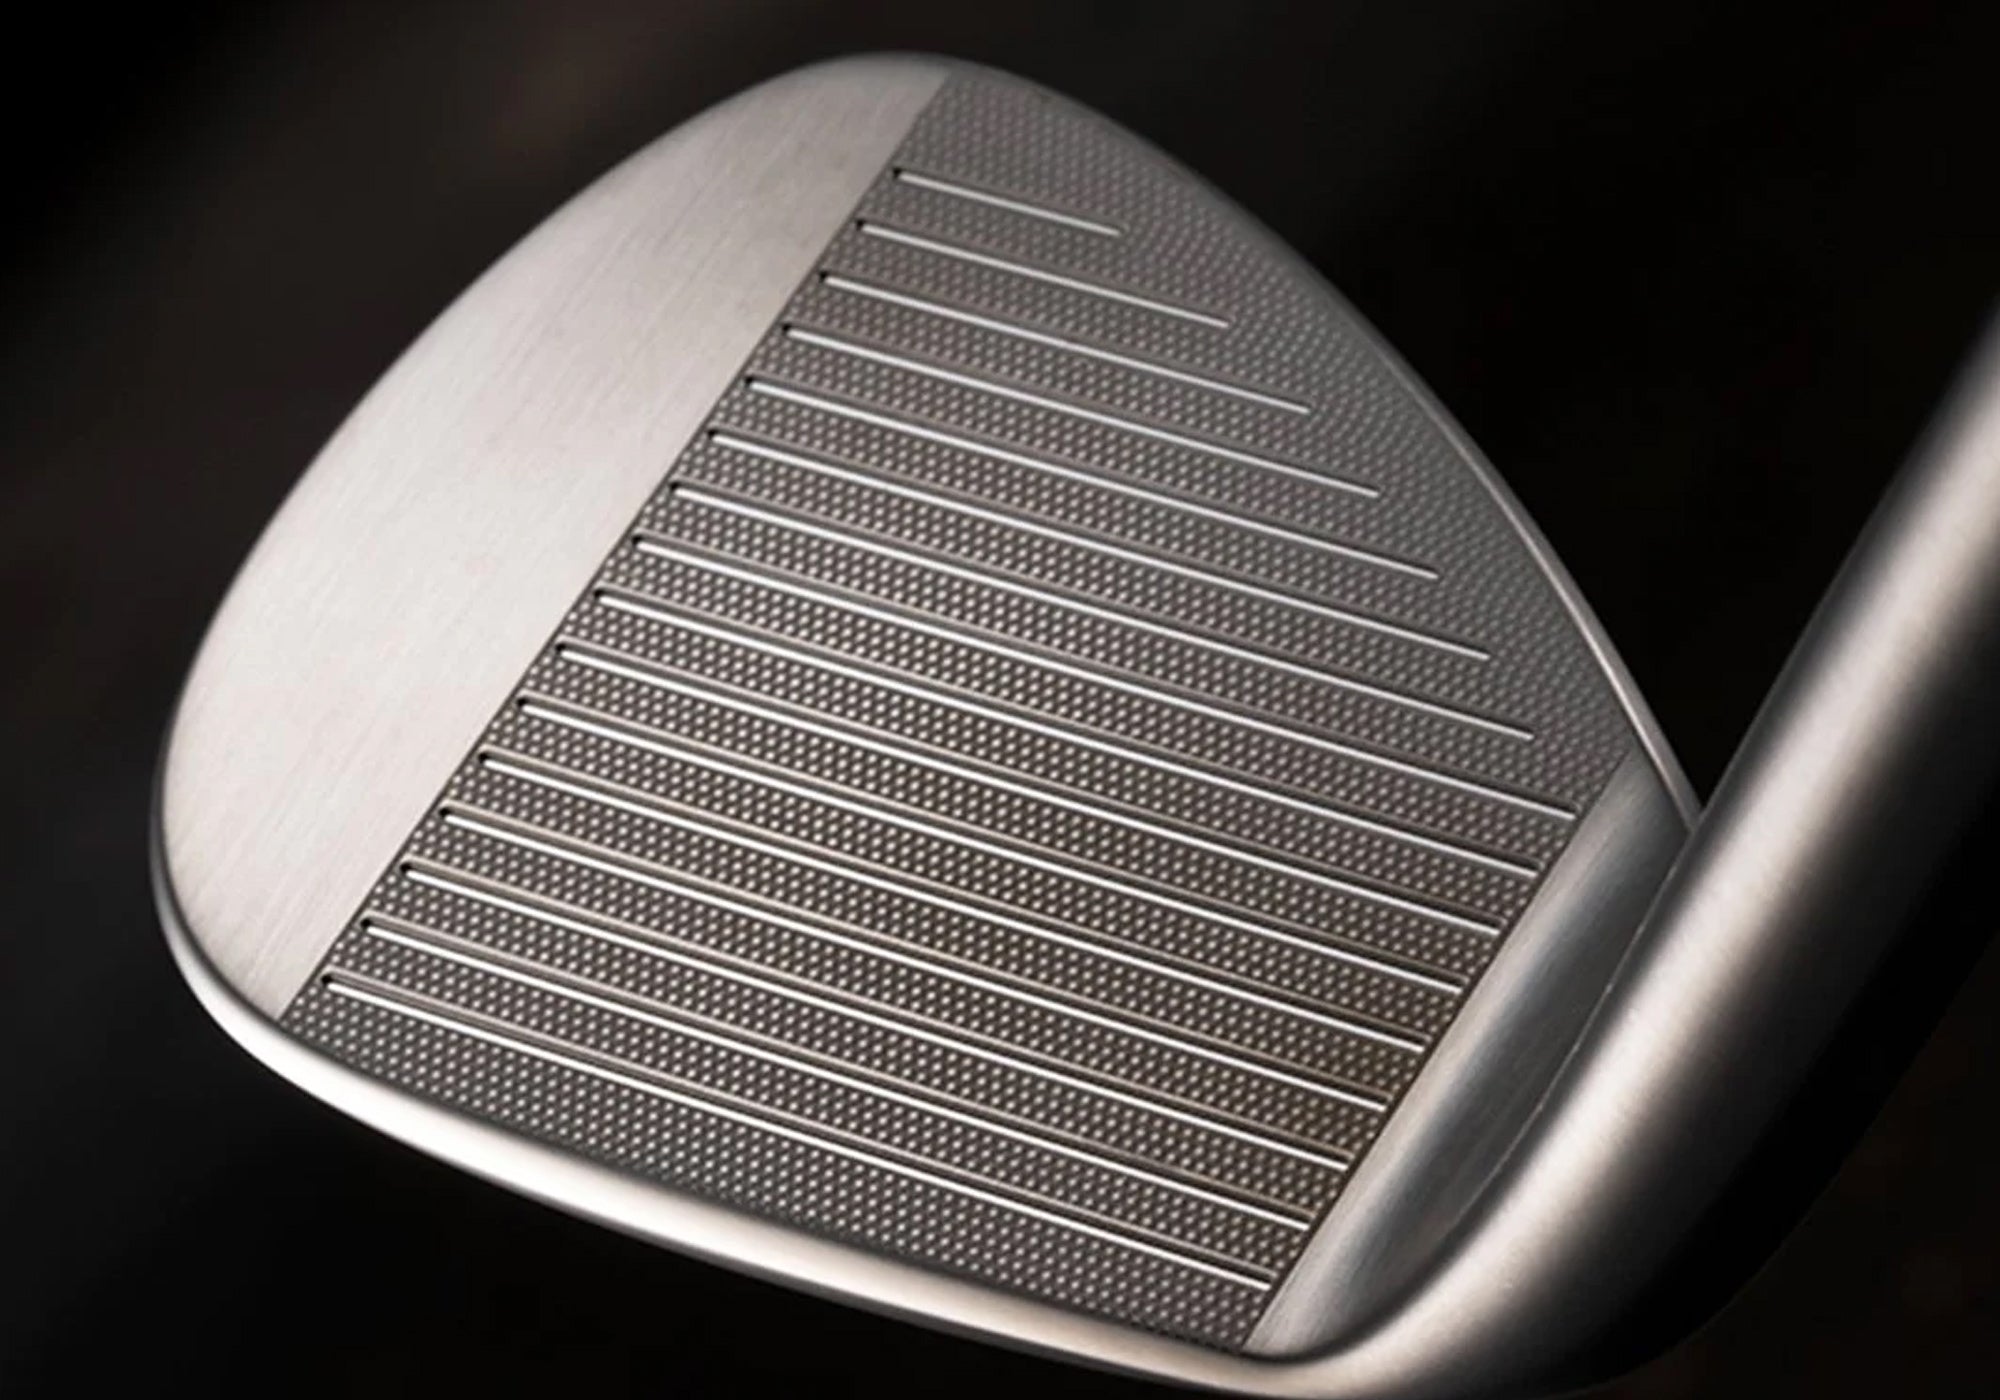 PROTOCONCEPT Golf, Protoconcept Wedge, Golf Wedge, Forged wedge technology